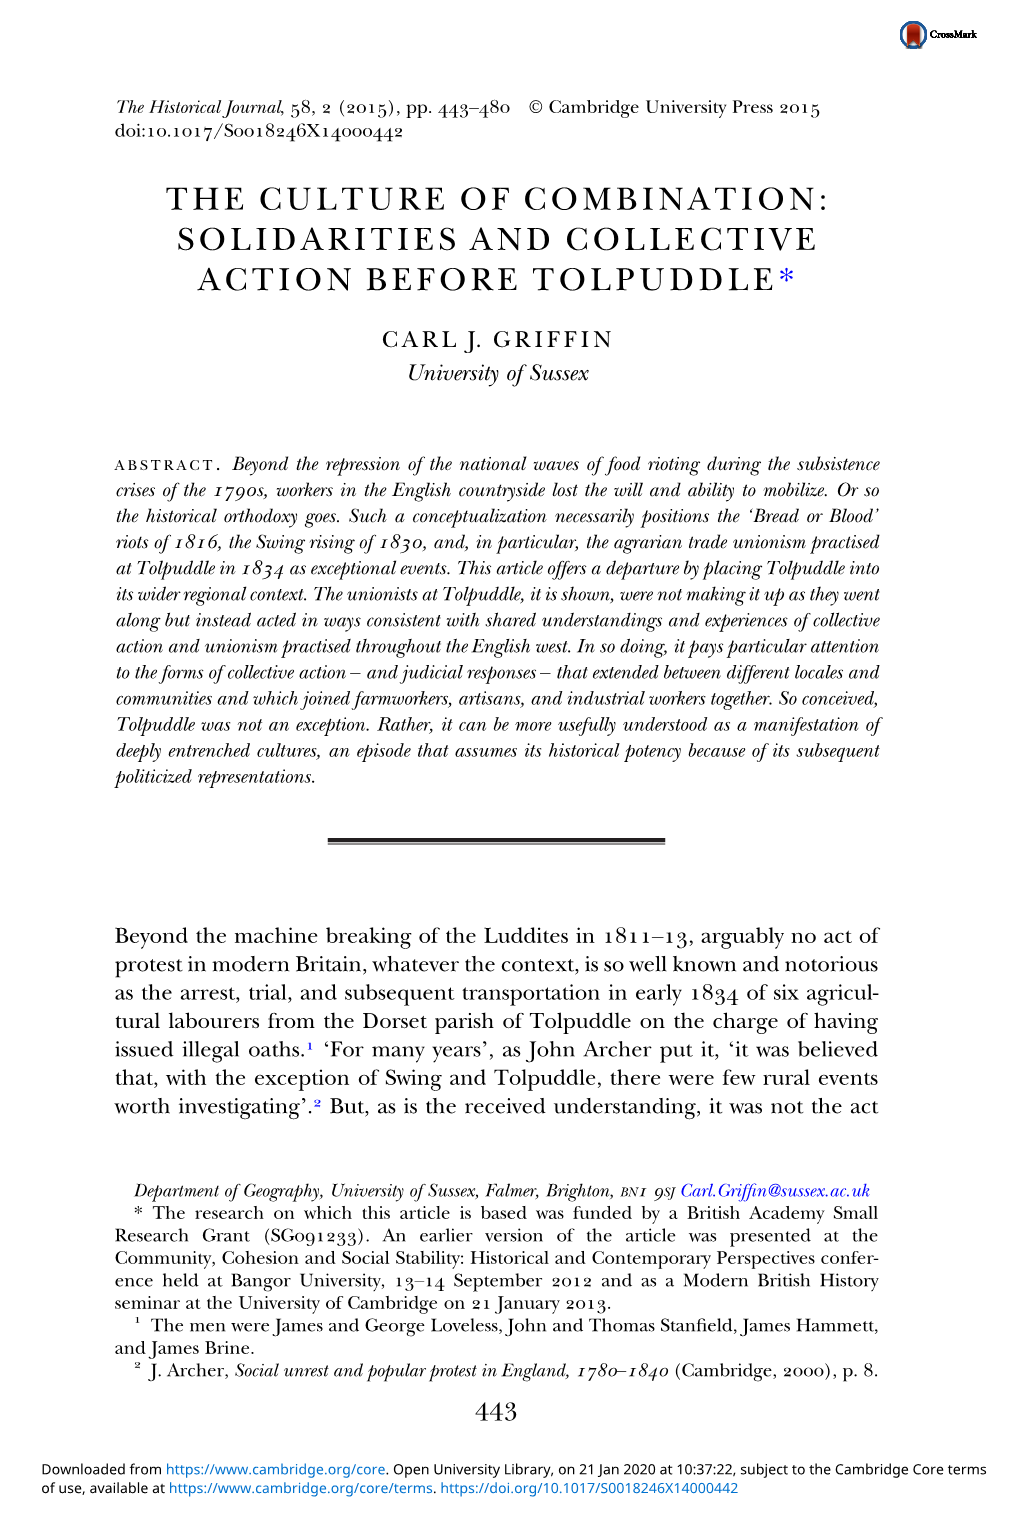 The Culture of Combination: Solidarities and Collective Action Before Tolpuddle*